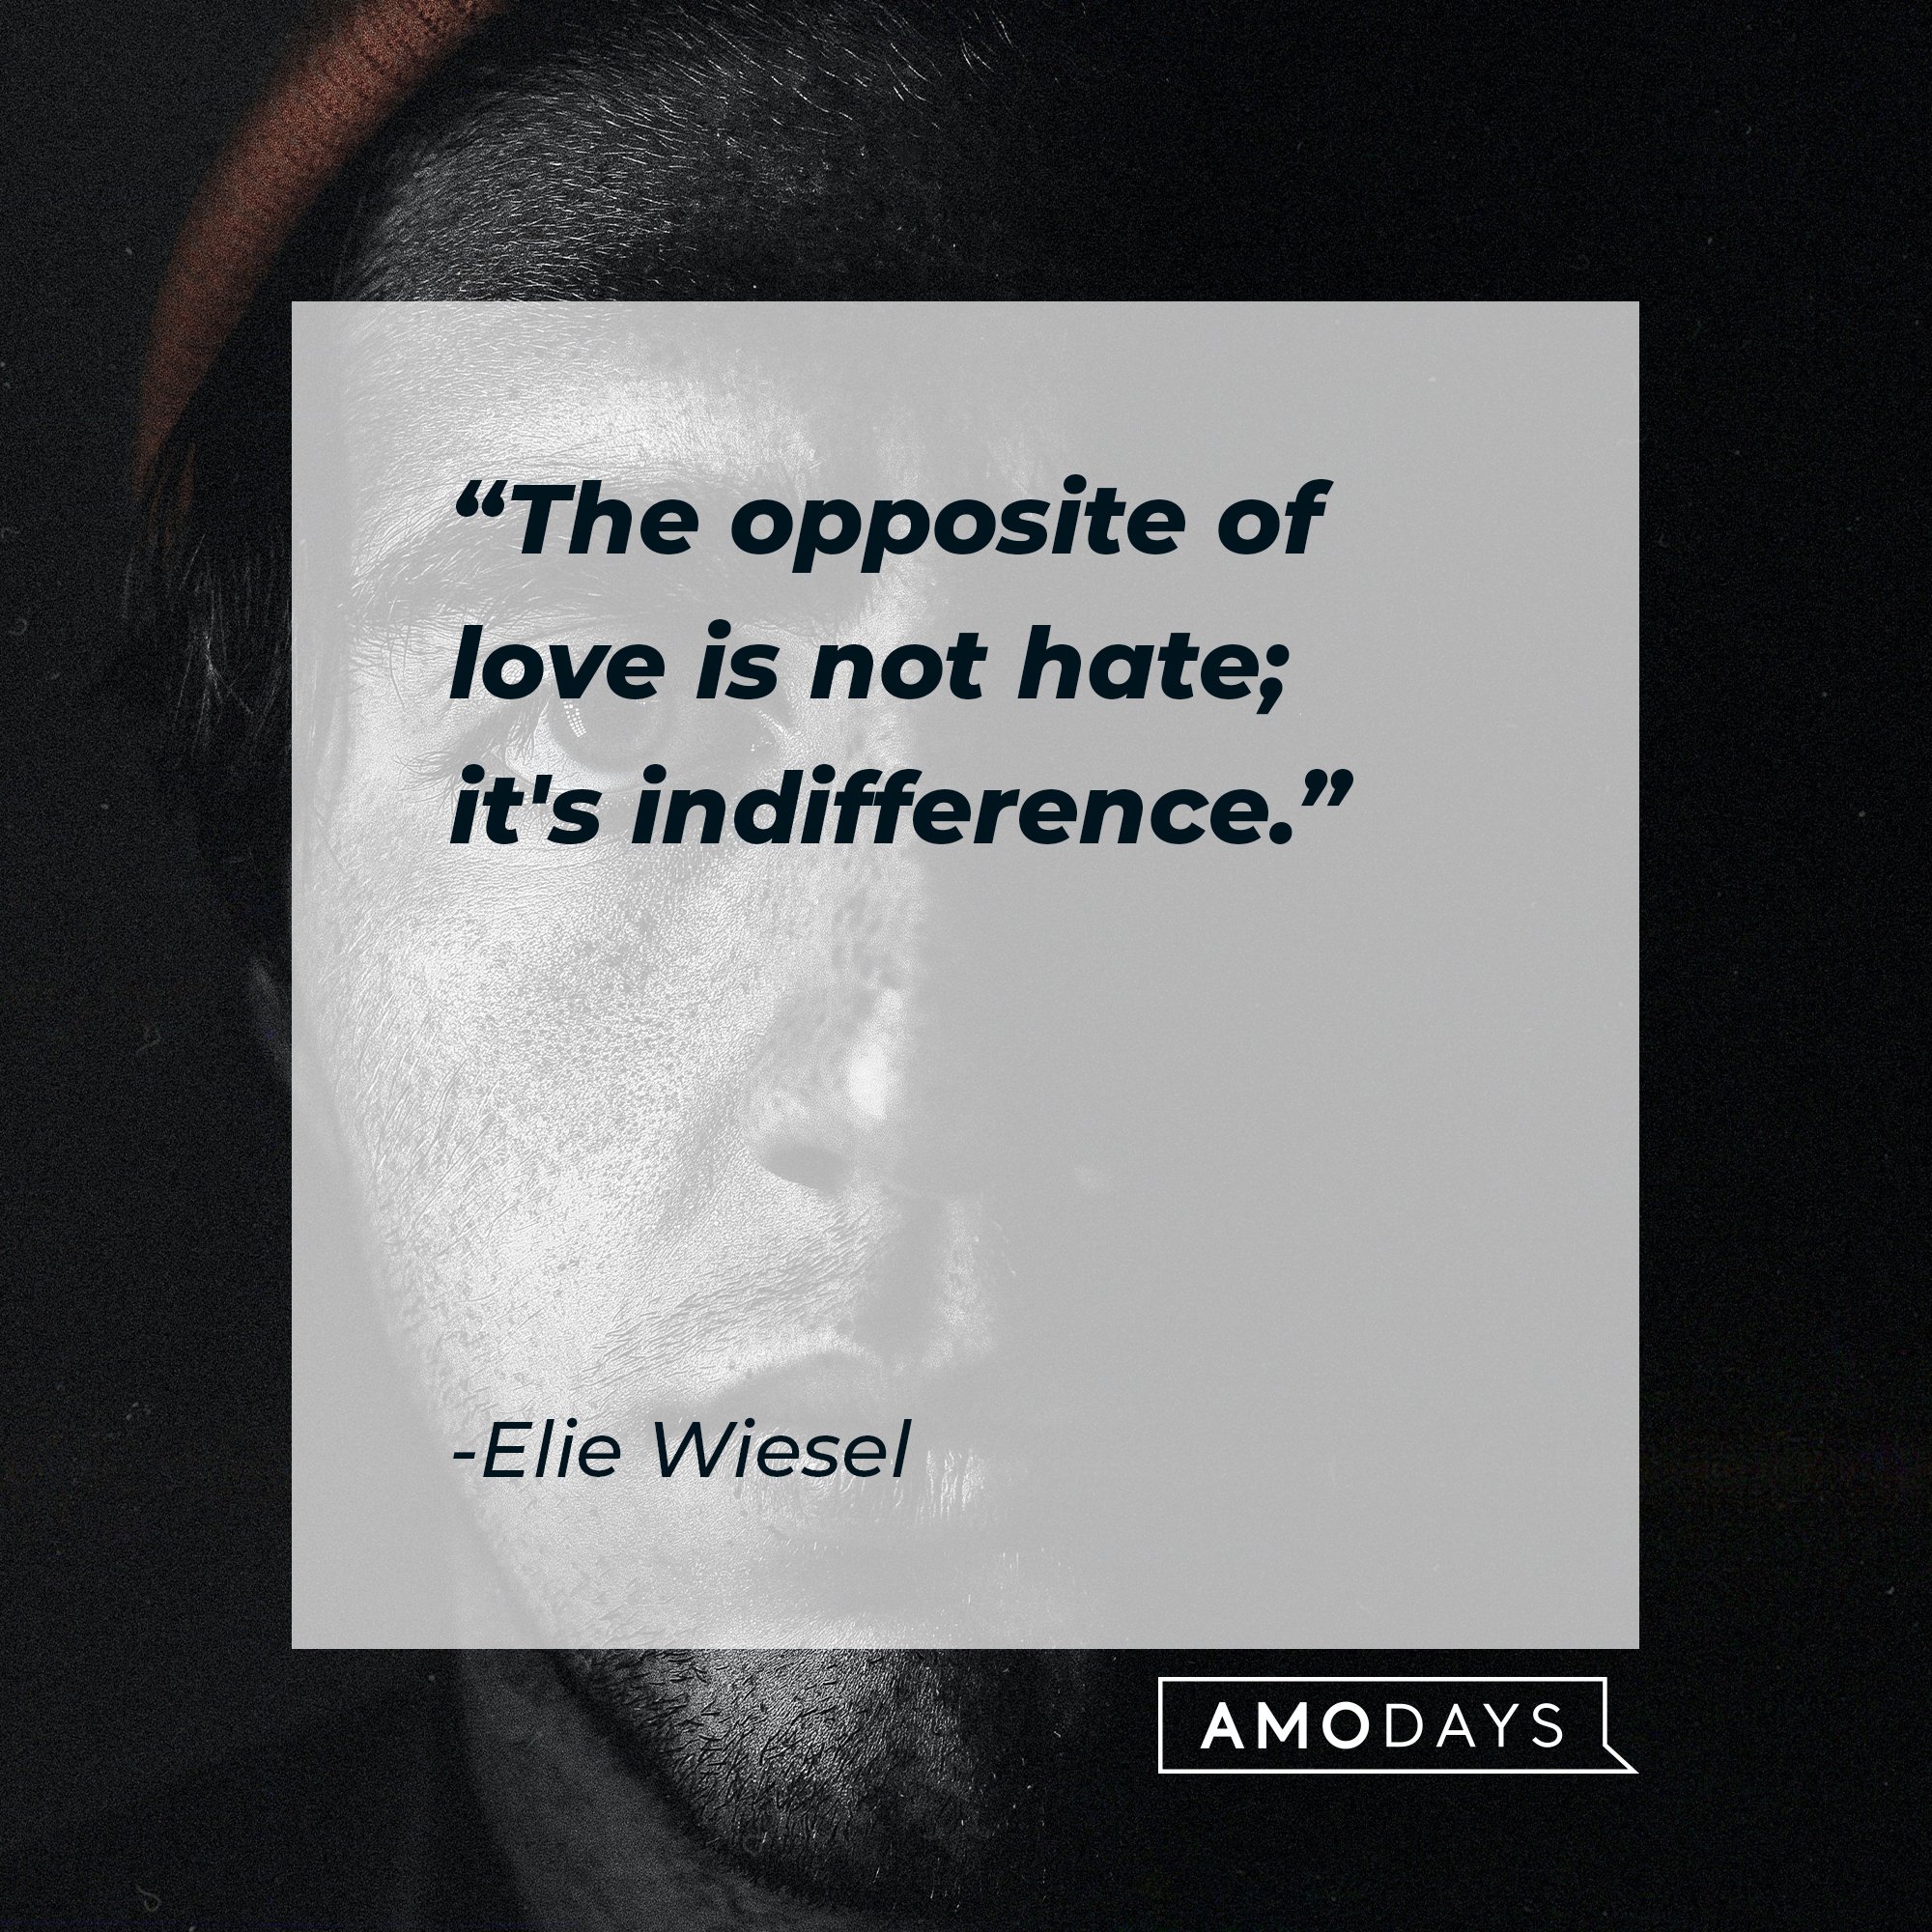 Elie Wiesel‘s quote: "The opposite of love is not hate; it's indifference." | Image: AmoDays 